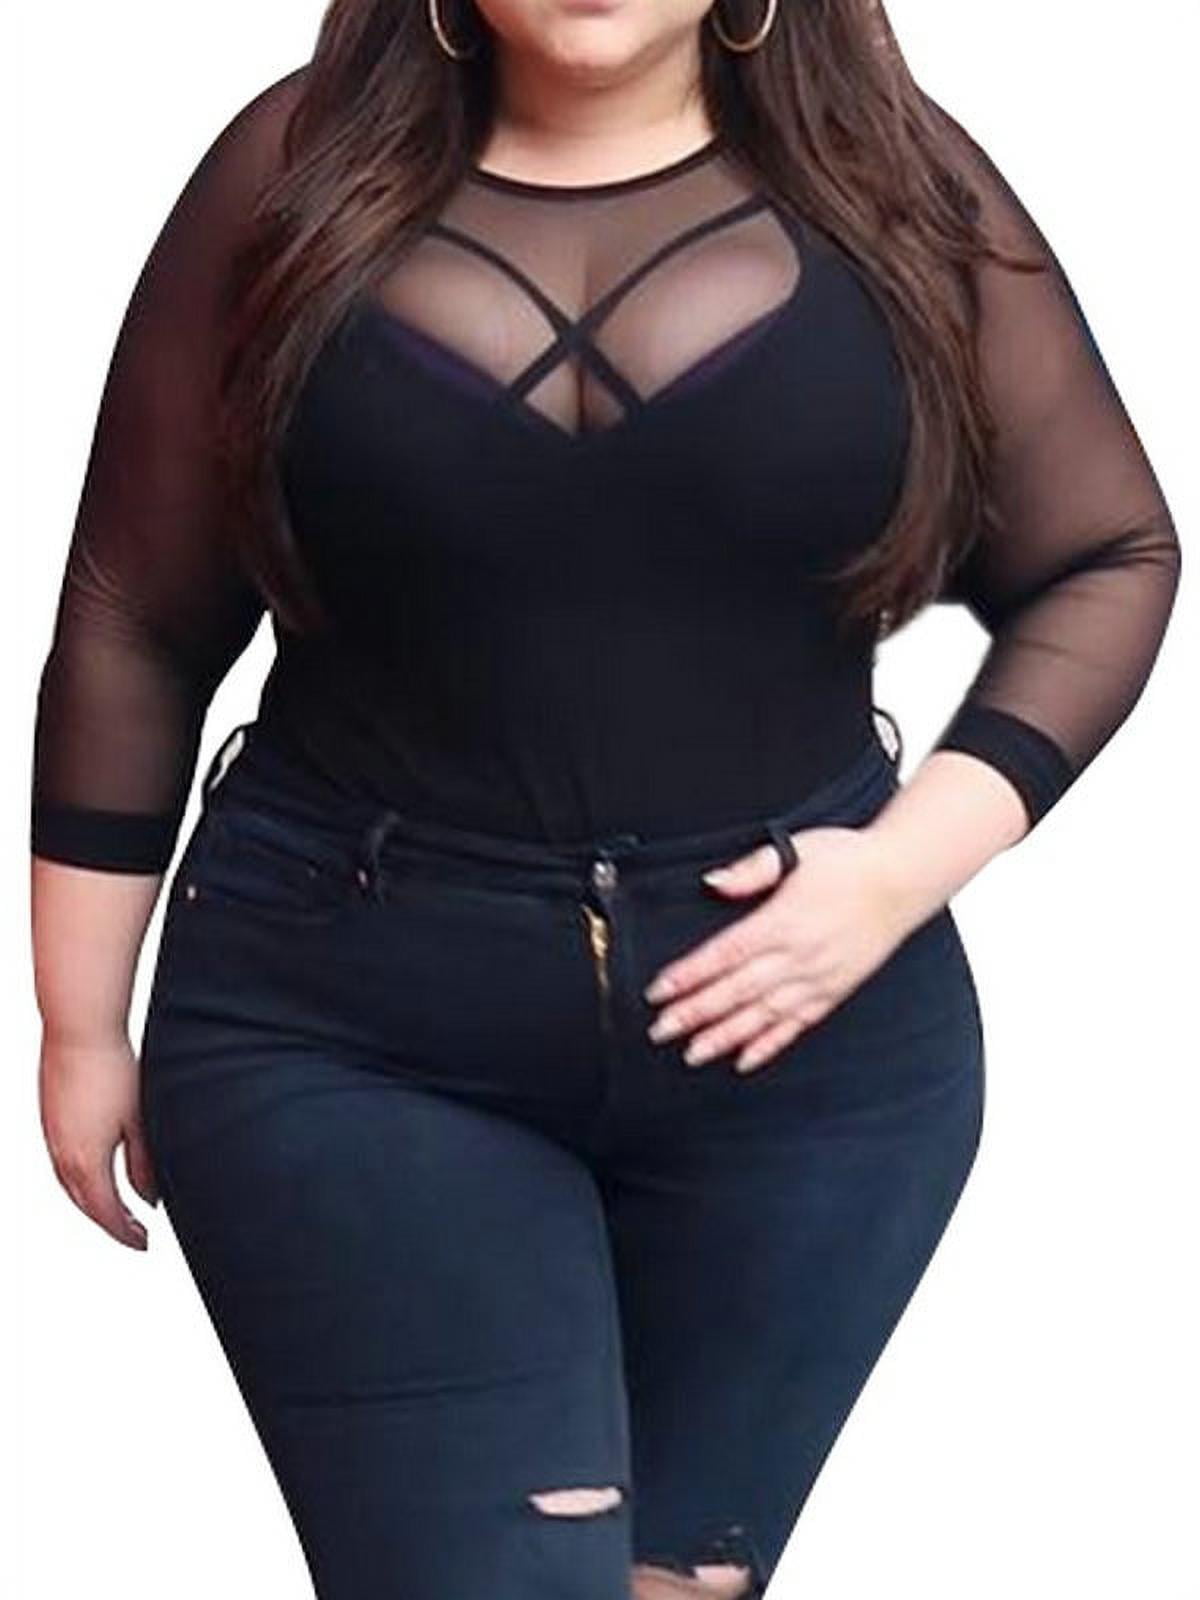 LAPA Women's Plus Size Sexy See Through Long Sleeve Tops 